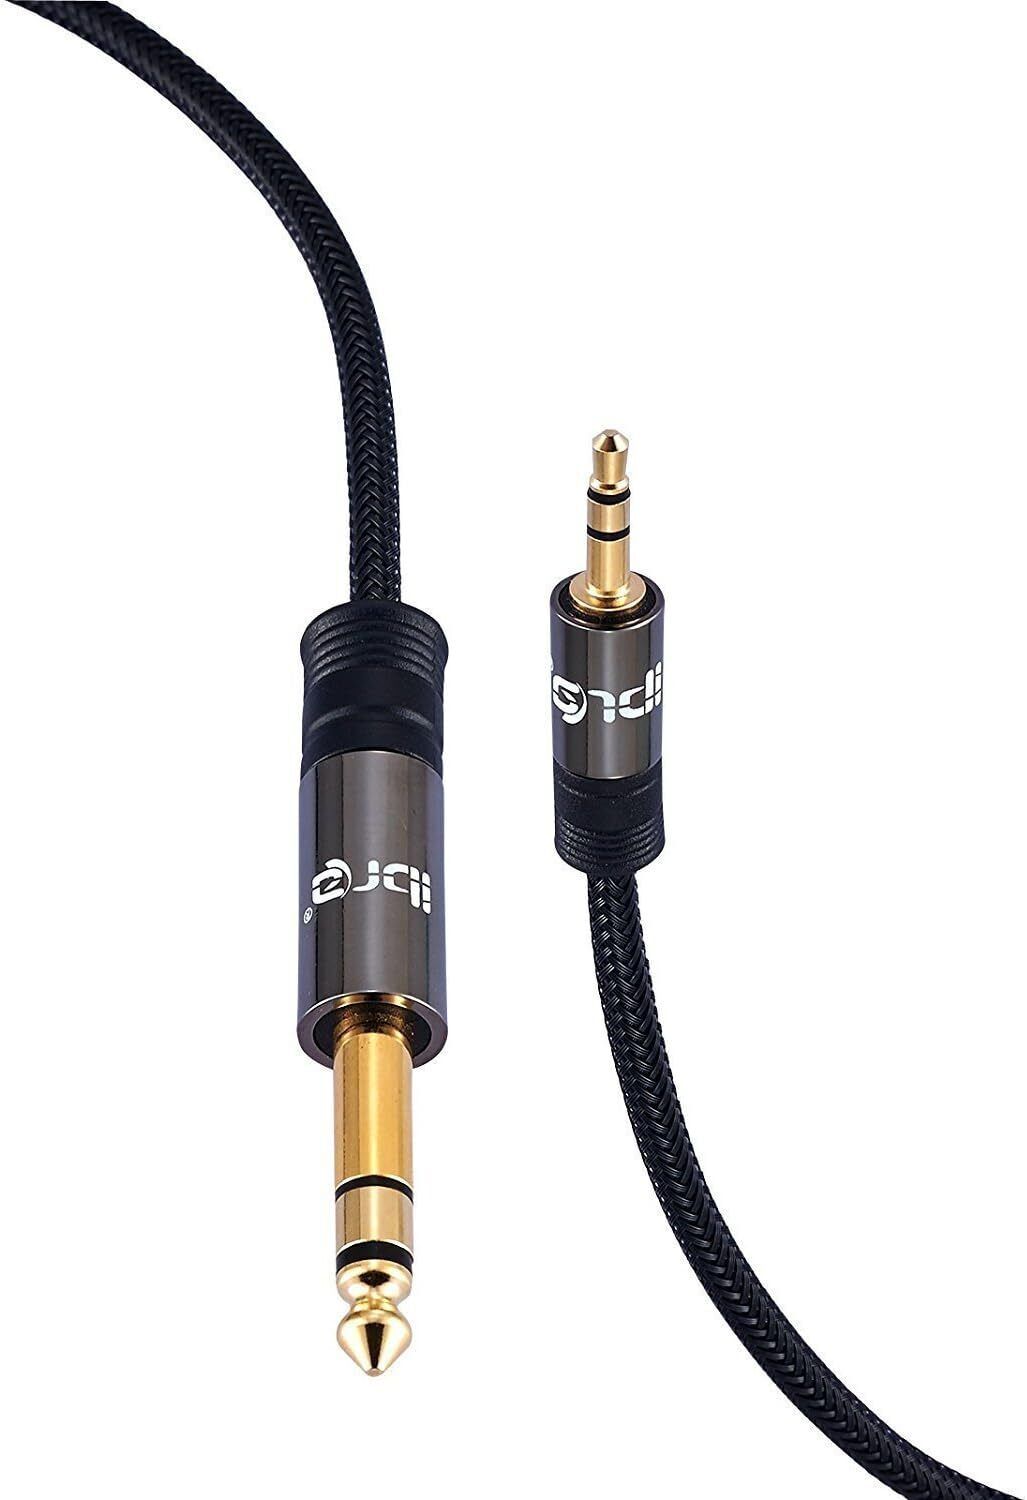 3.5mm to 6.35mm 1/4 inch Small to Big Mono Jack Audio Cable Plug Patch Lead Amp - 1M